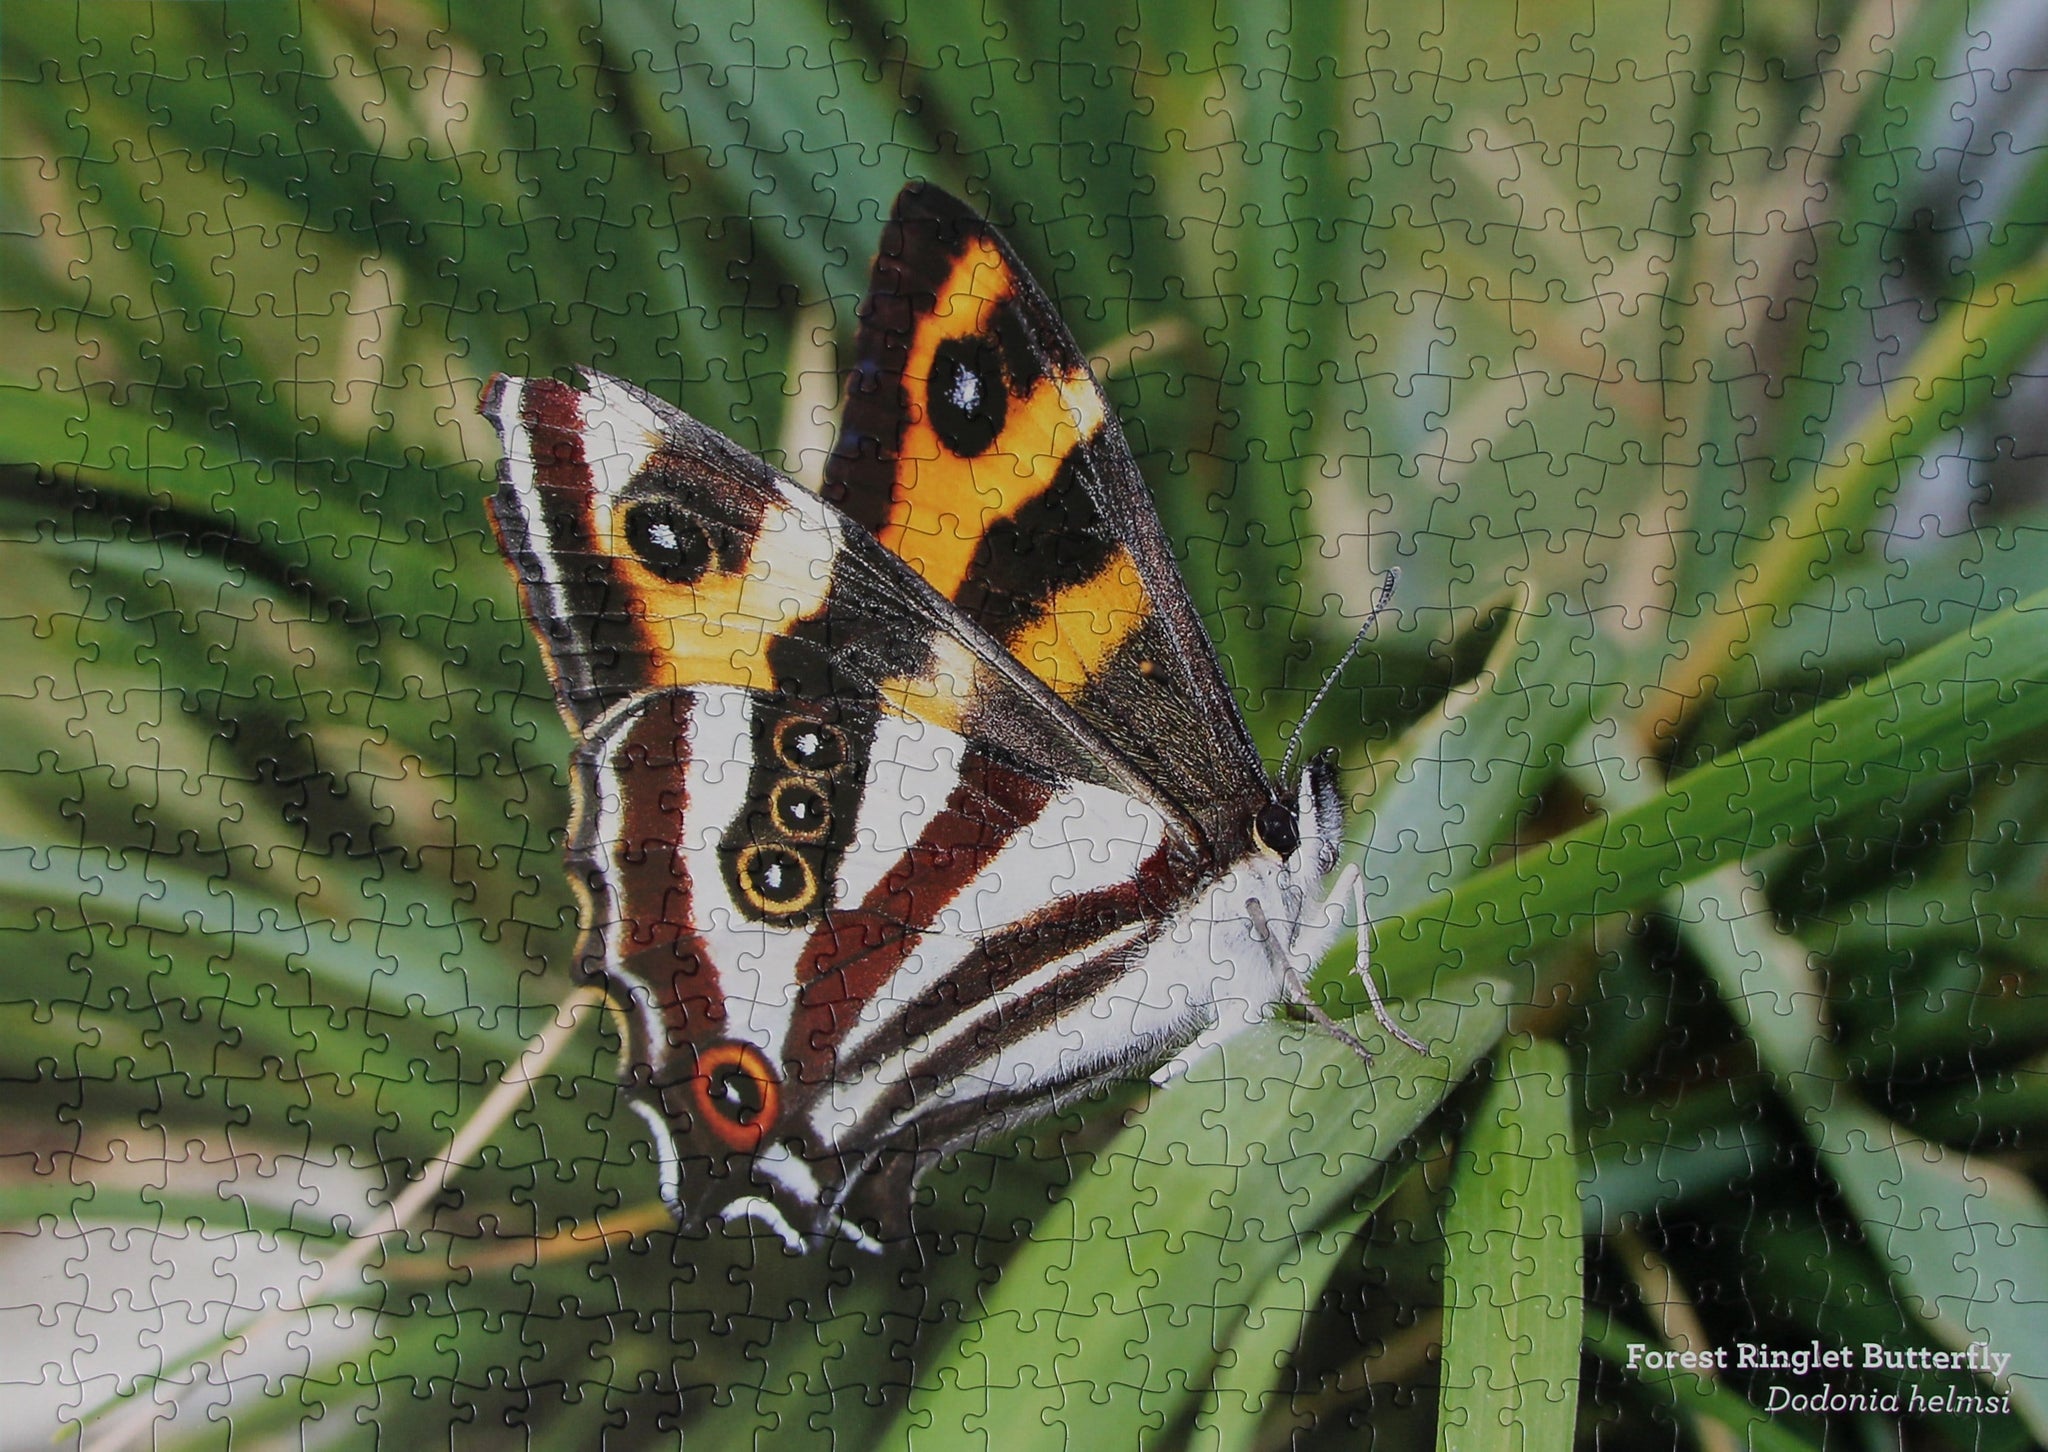 Completed 500 XL piece nature themed jigsaw puzzle showcasing endangered butterfly